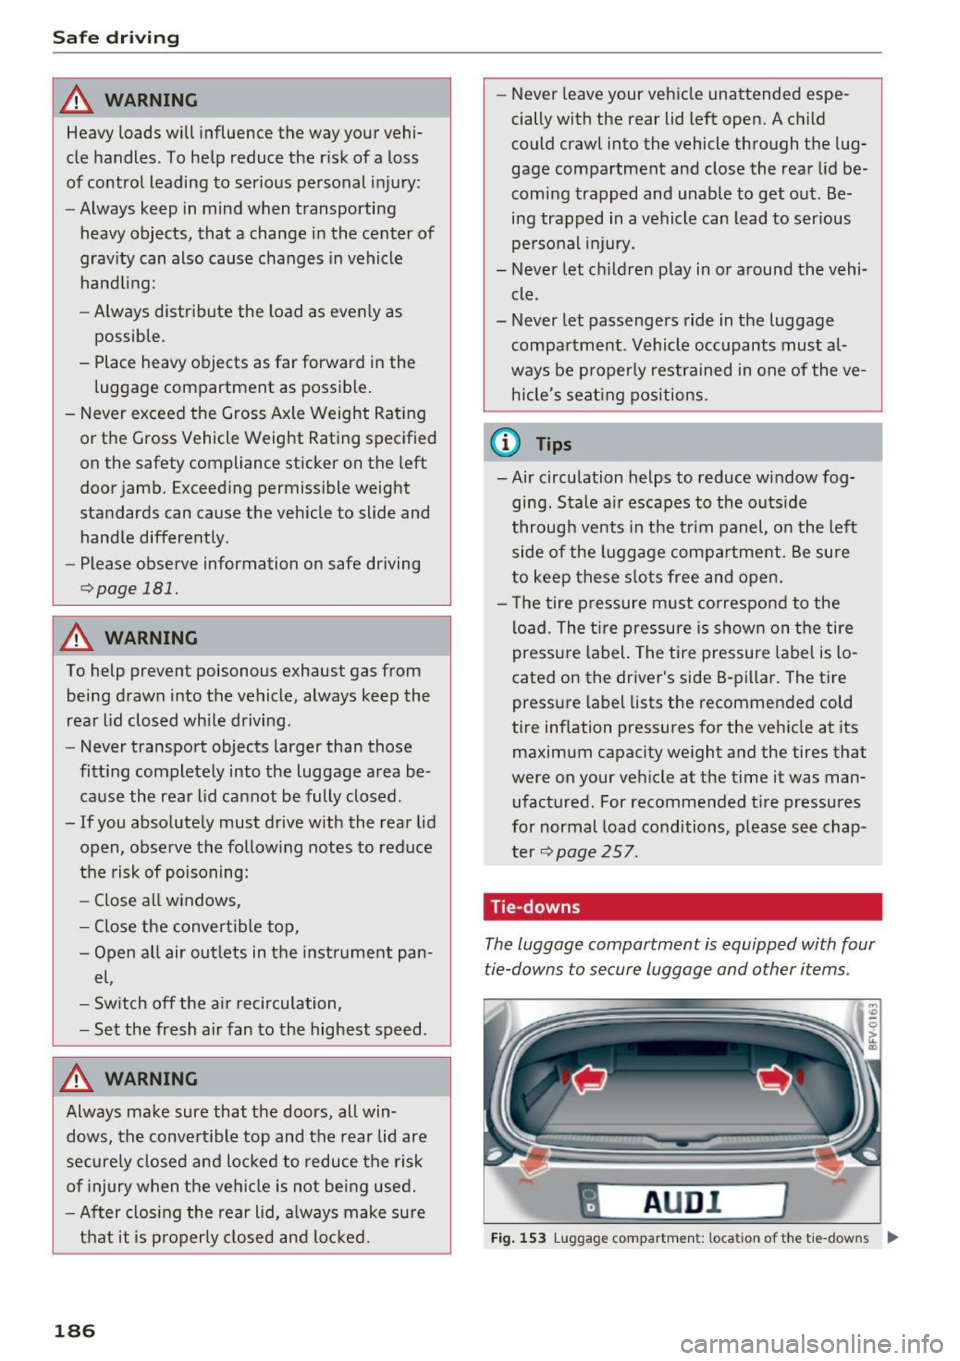 AUDI TT ROADSTER 2017  Owners Manual Safe  driving 
_& WARNING 
Heavy loads  will  influence  the  way your  vehi­
cle  handles.  To  help  reduce  the  risk  of a  loss 
of control  leading  to  serious  personal  injury: 
- Always kee